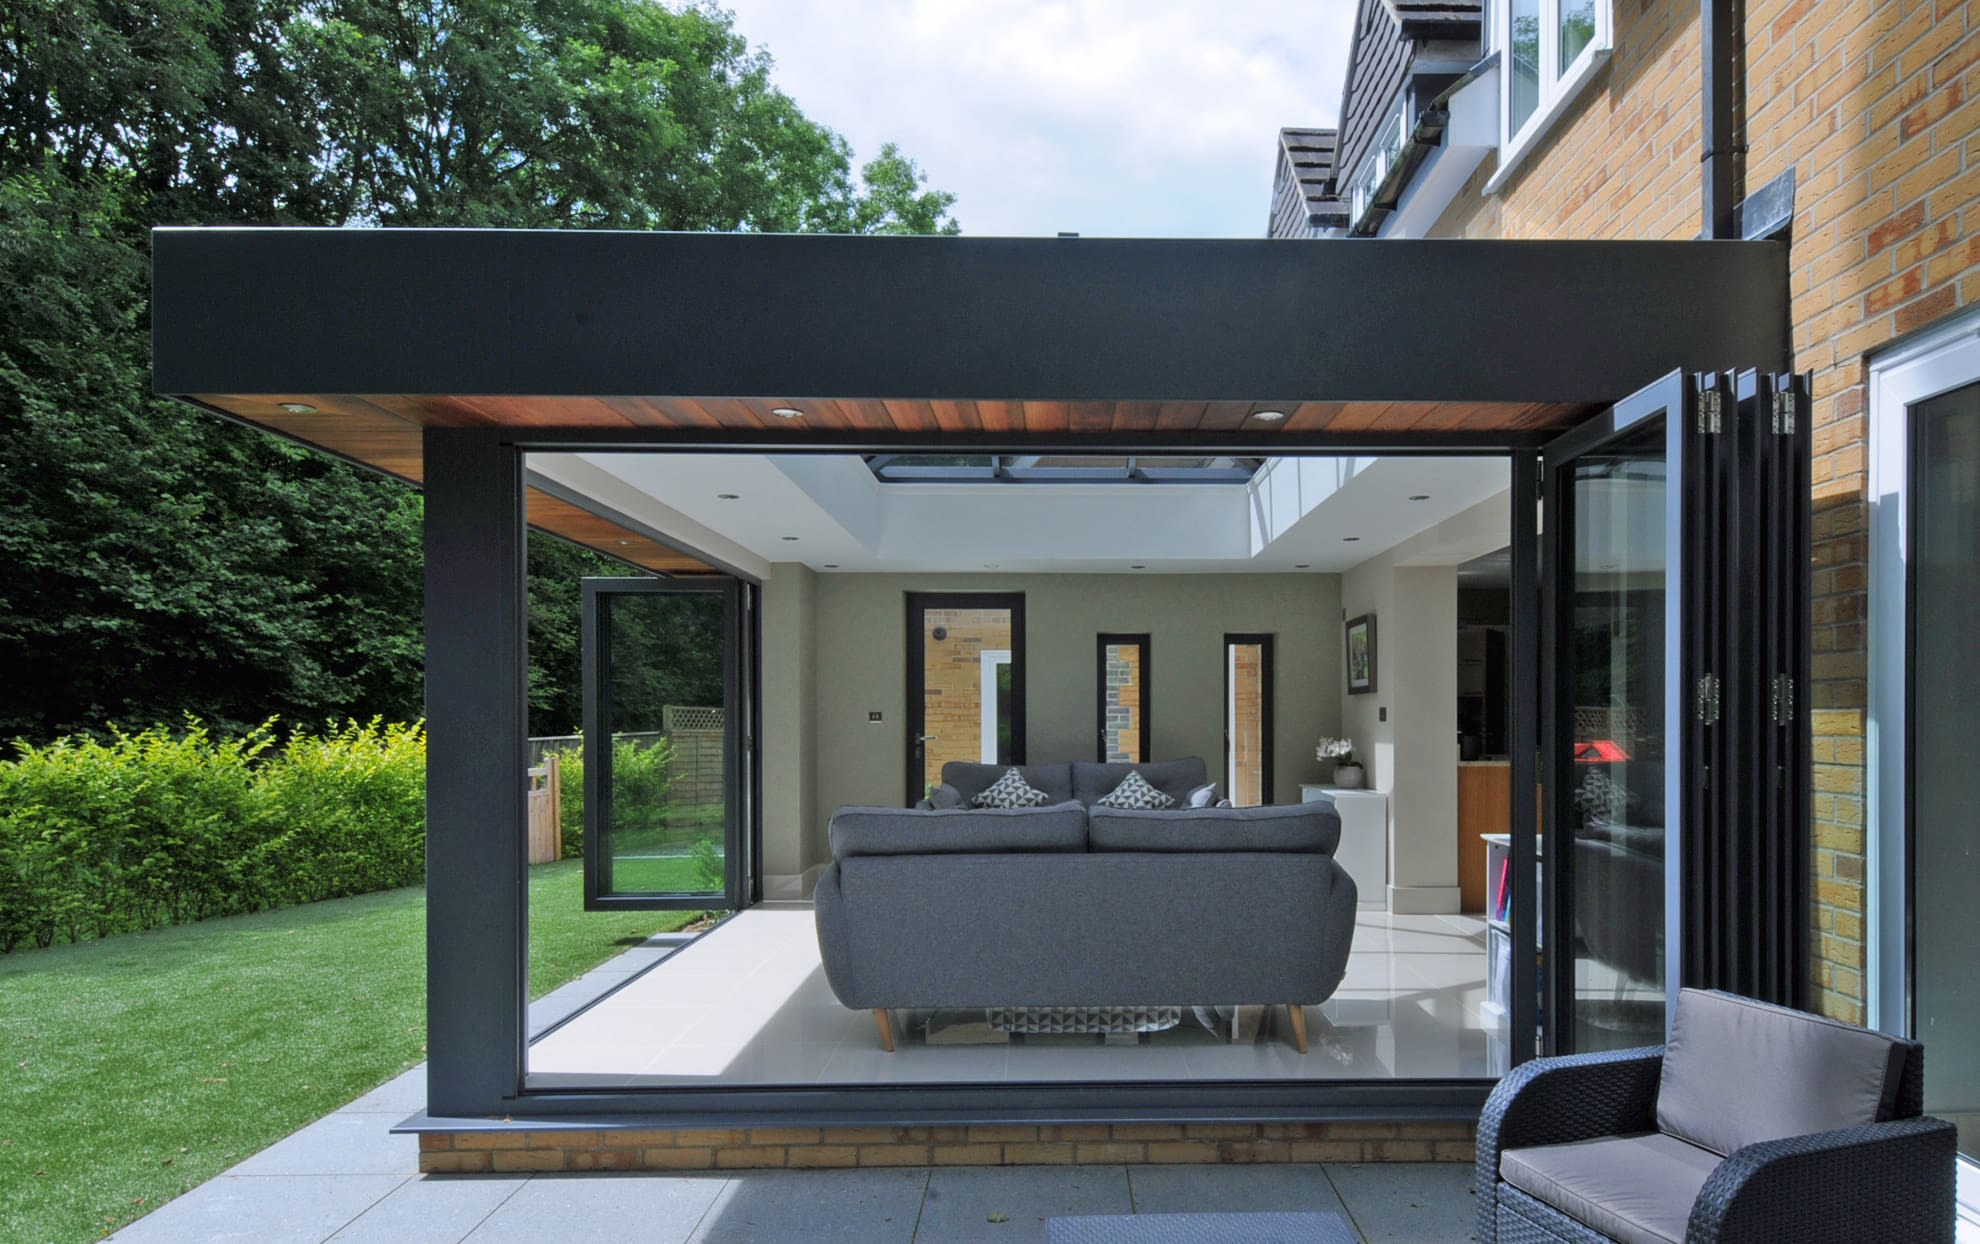 Contemporary living room interior with roof lantern and open bifolding doors.